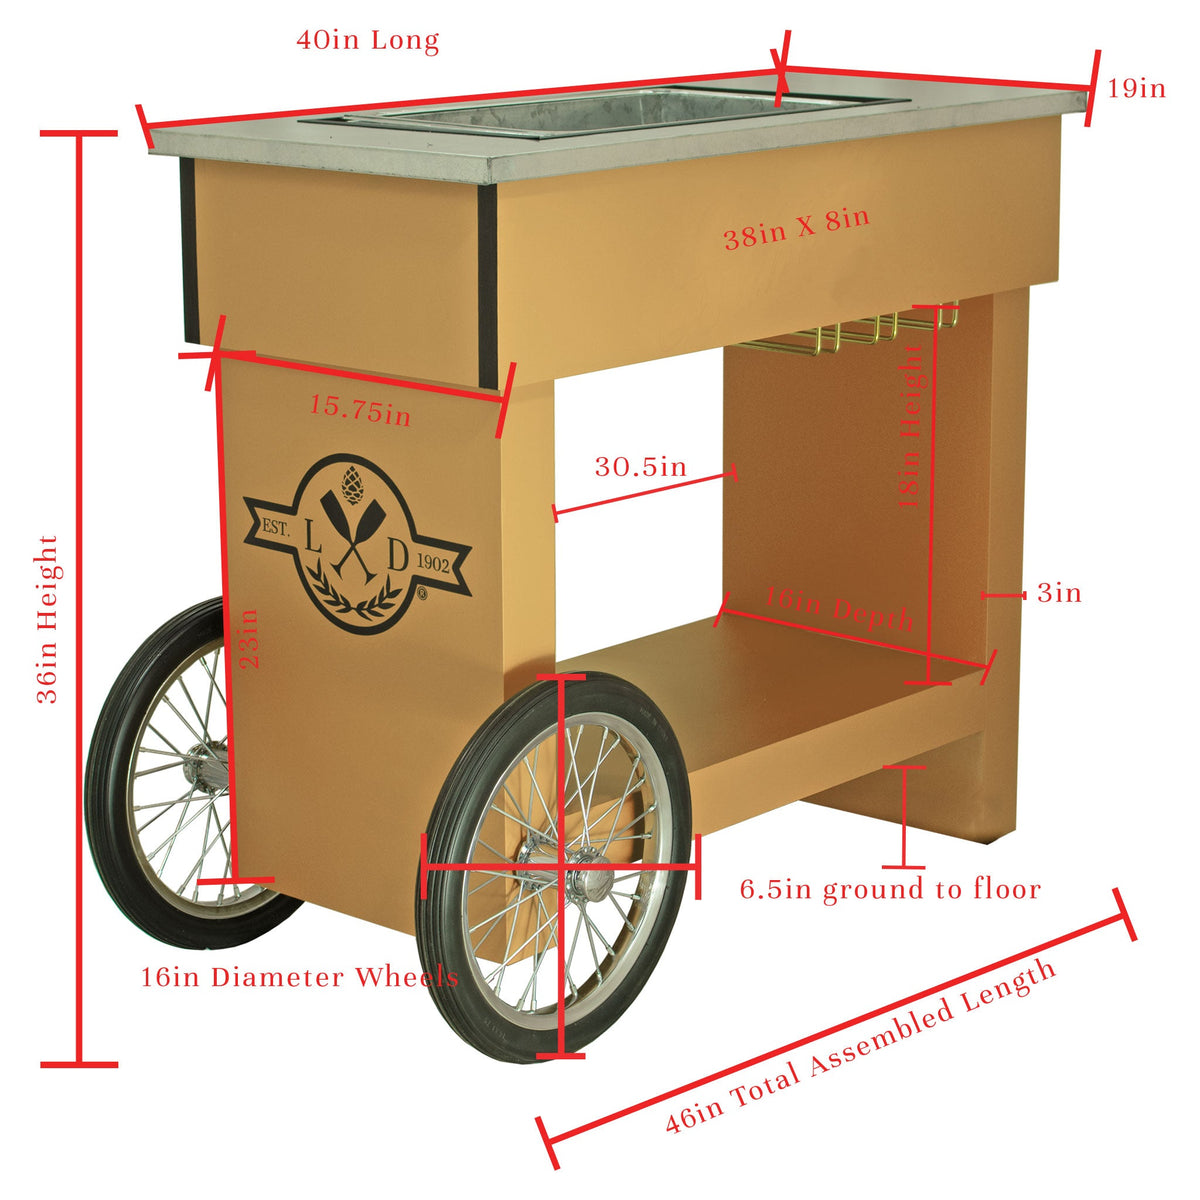 Dimensions and specs of Lee Display's Champagne and Wine Bar Cart with Wheels